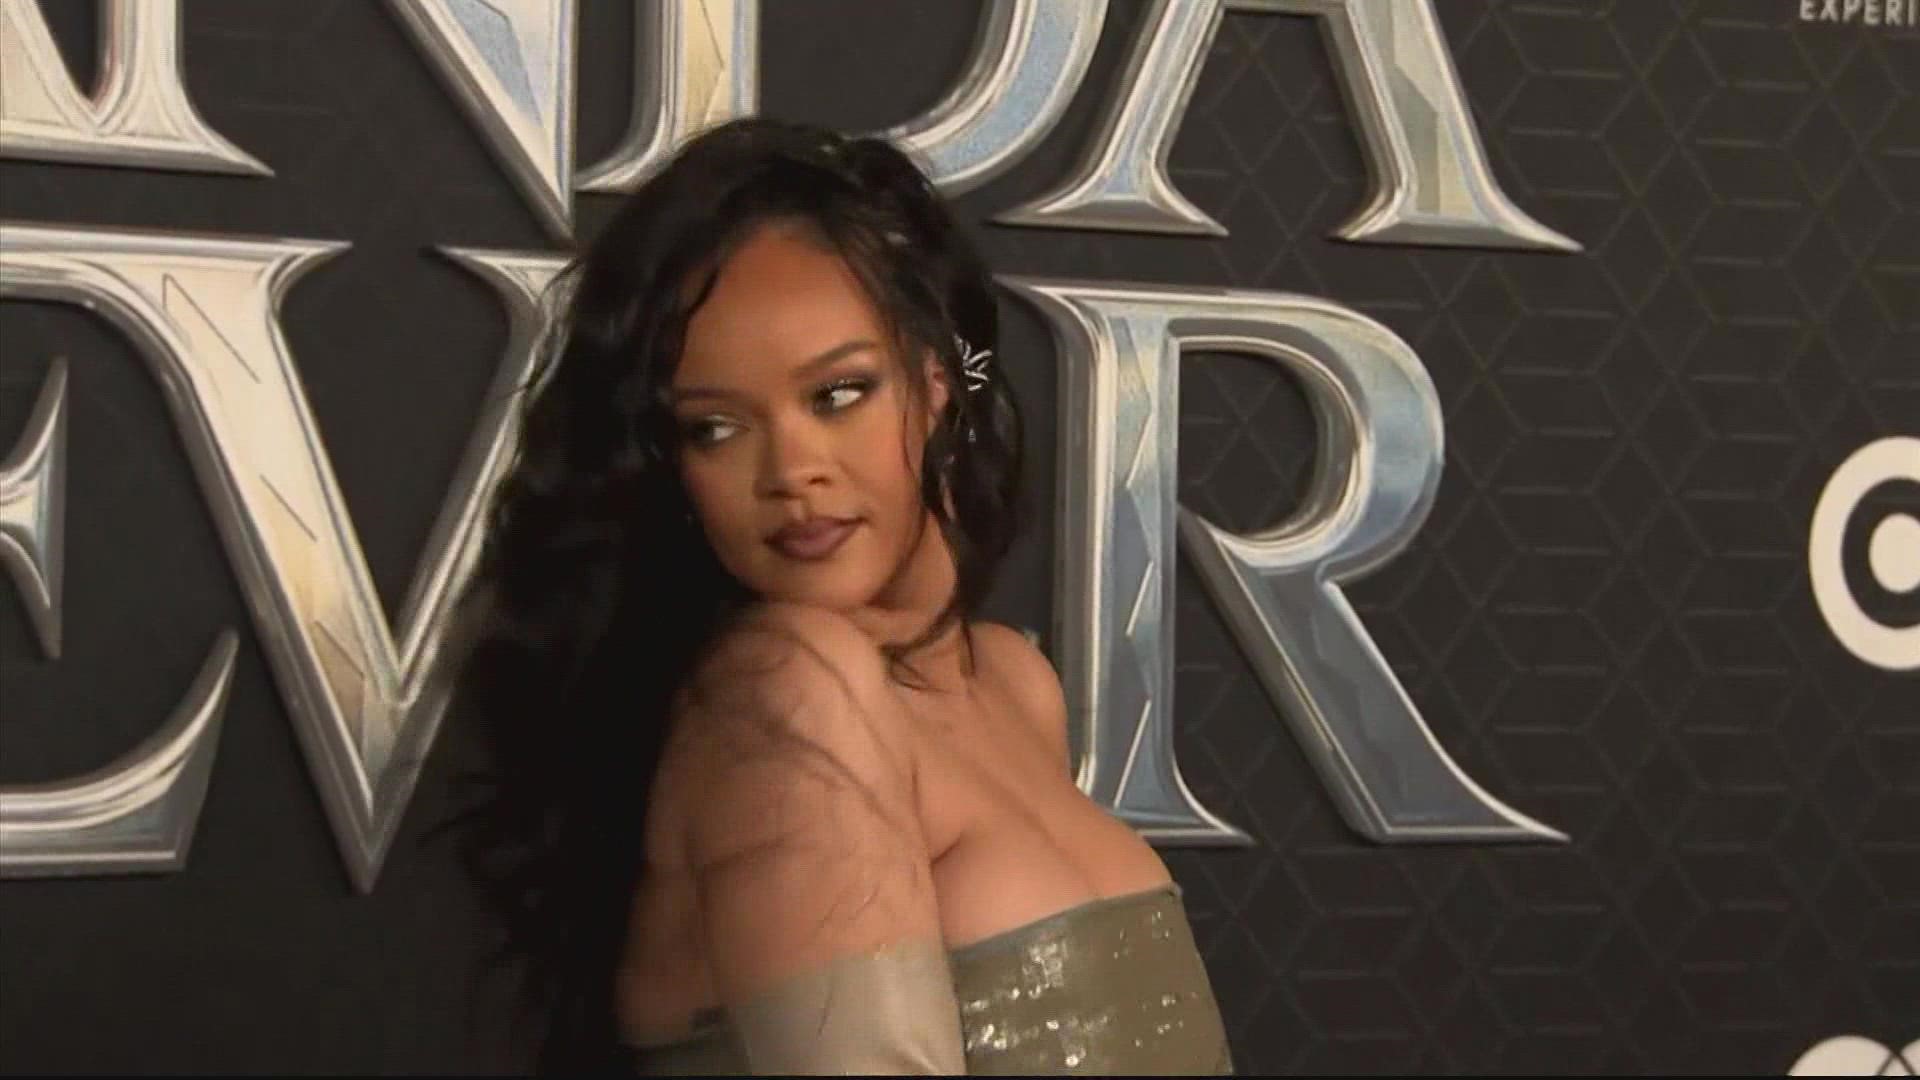 All eyes were on Rihanna at the Black Panther: Wakanda Forever premiere at the Dolby Theatre. Rihanna has officially announced "Lift Me Up," her first new single as